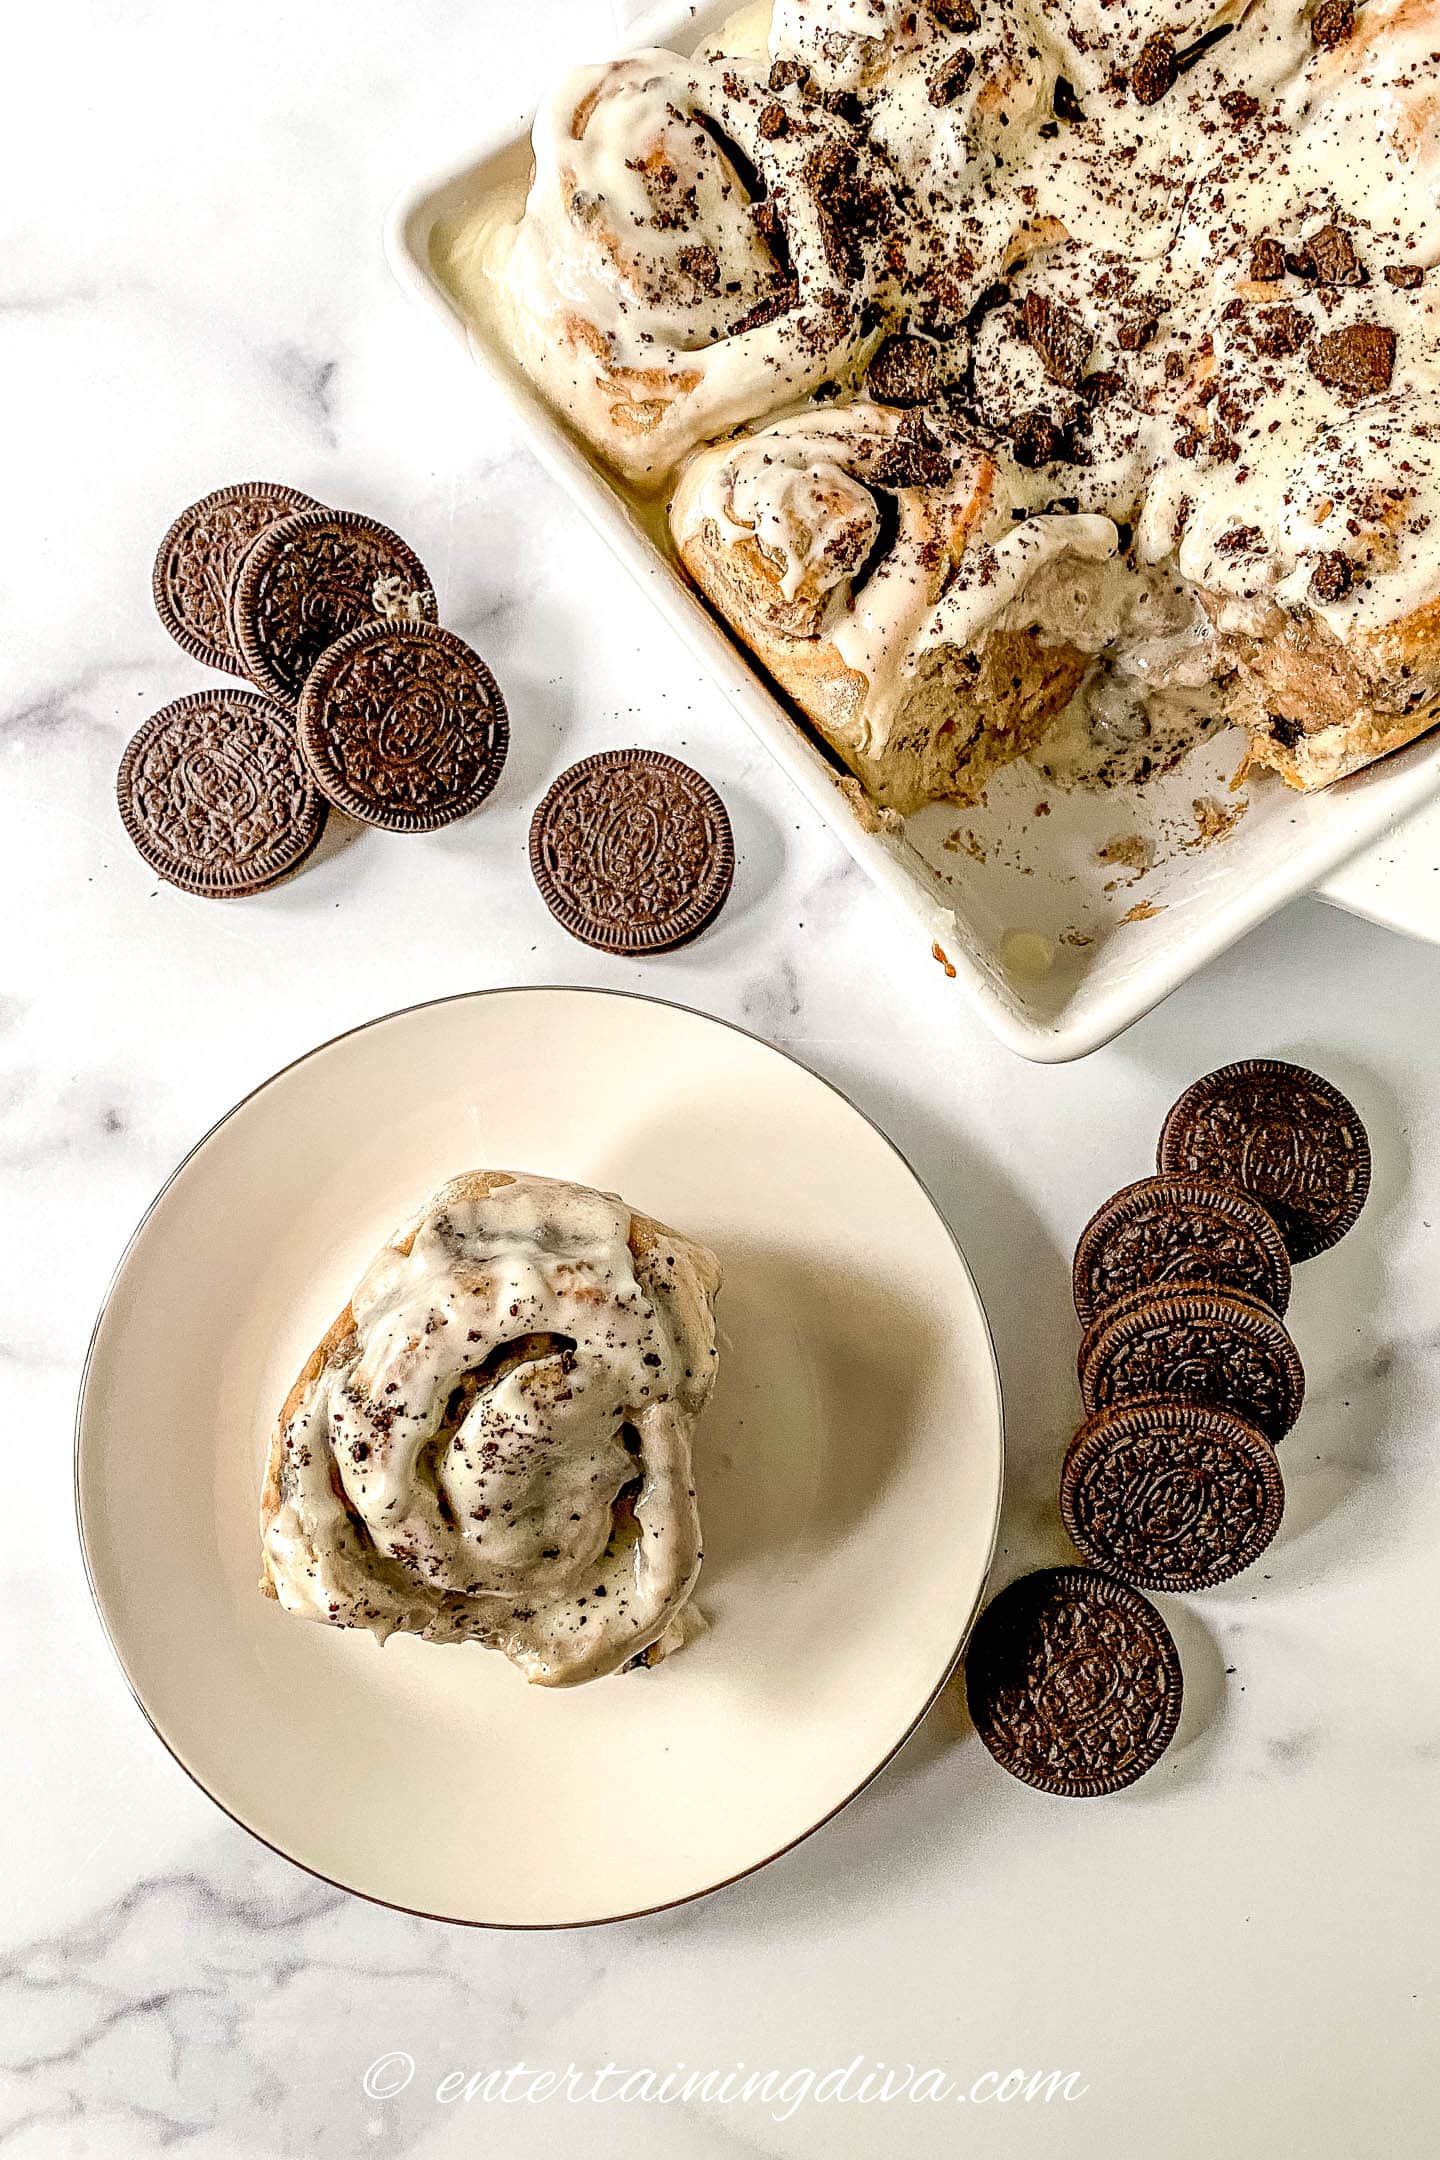 Overhead picture of an Oreo cinnamon roll on a plate beside a pan of cinnamon rolls with Oreo cookies on the icing